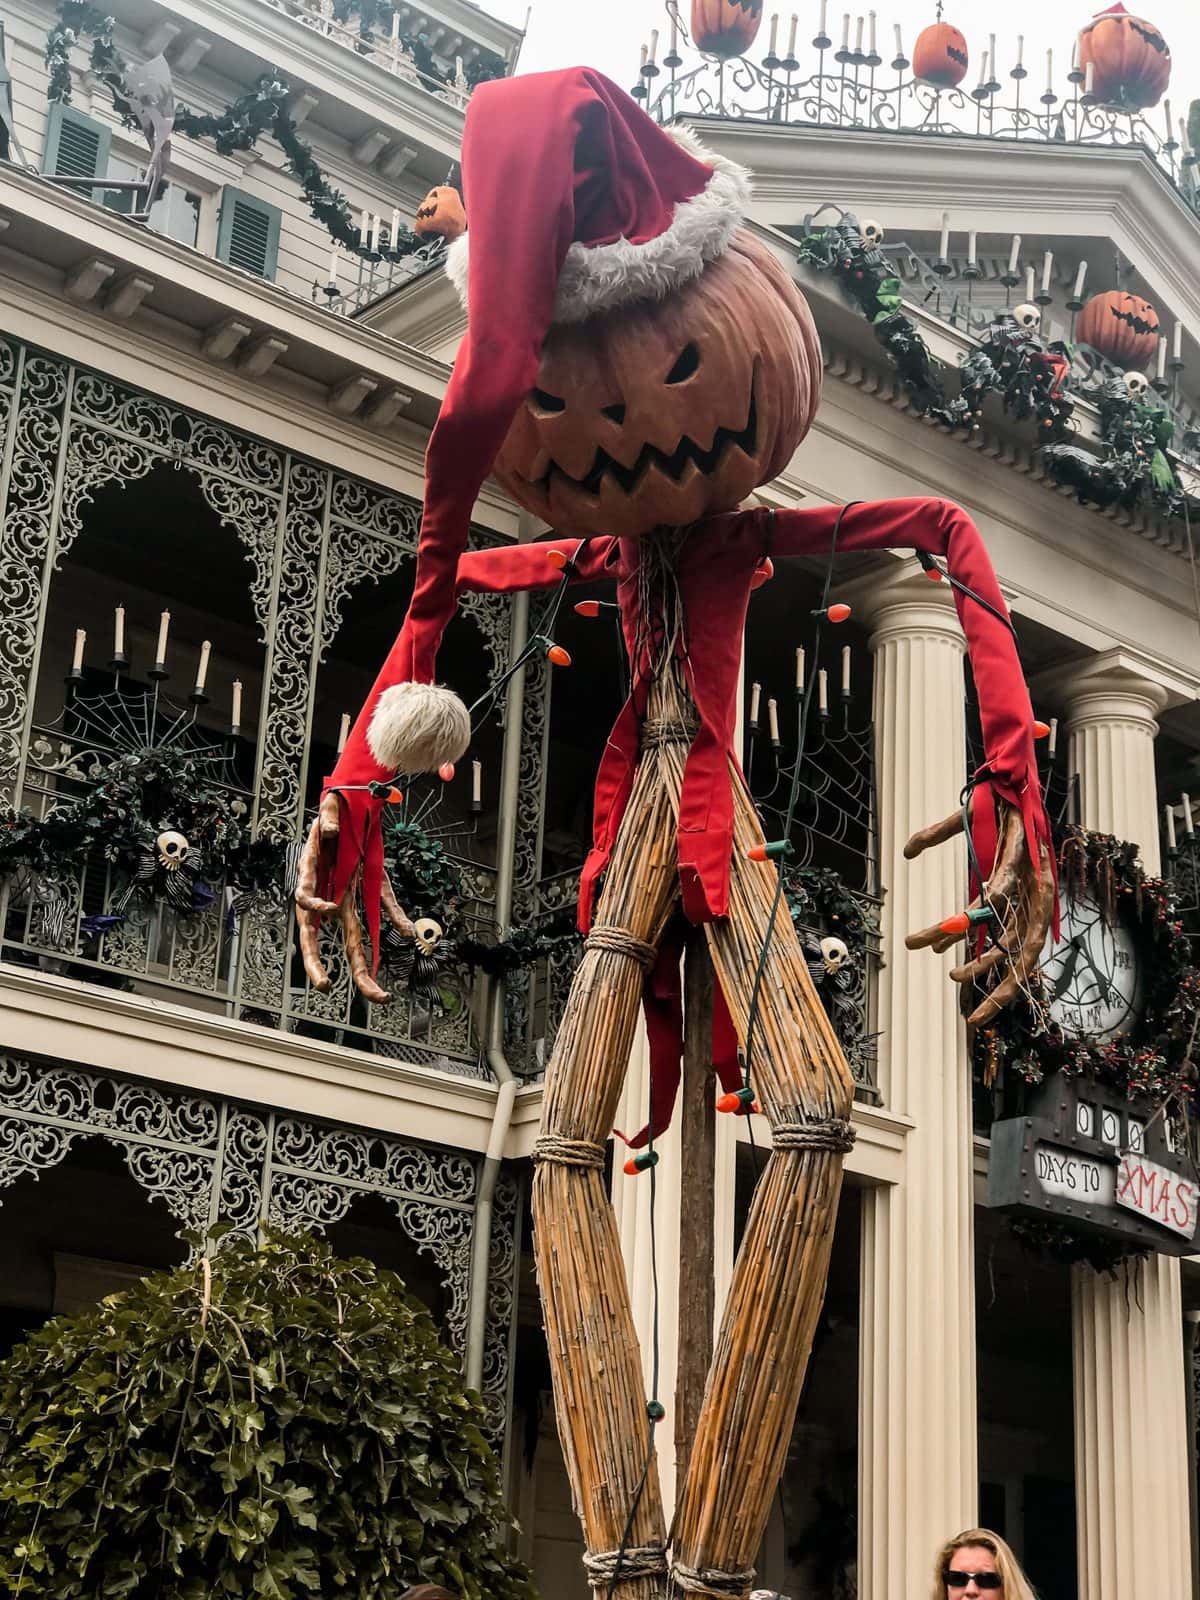 when does disneyland decorate for halloween?